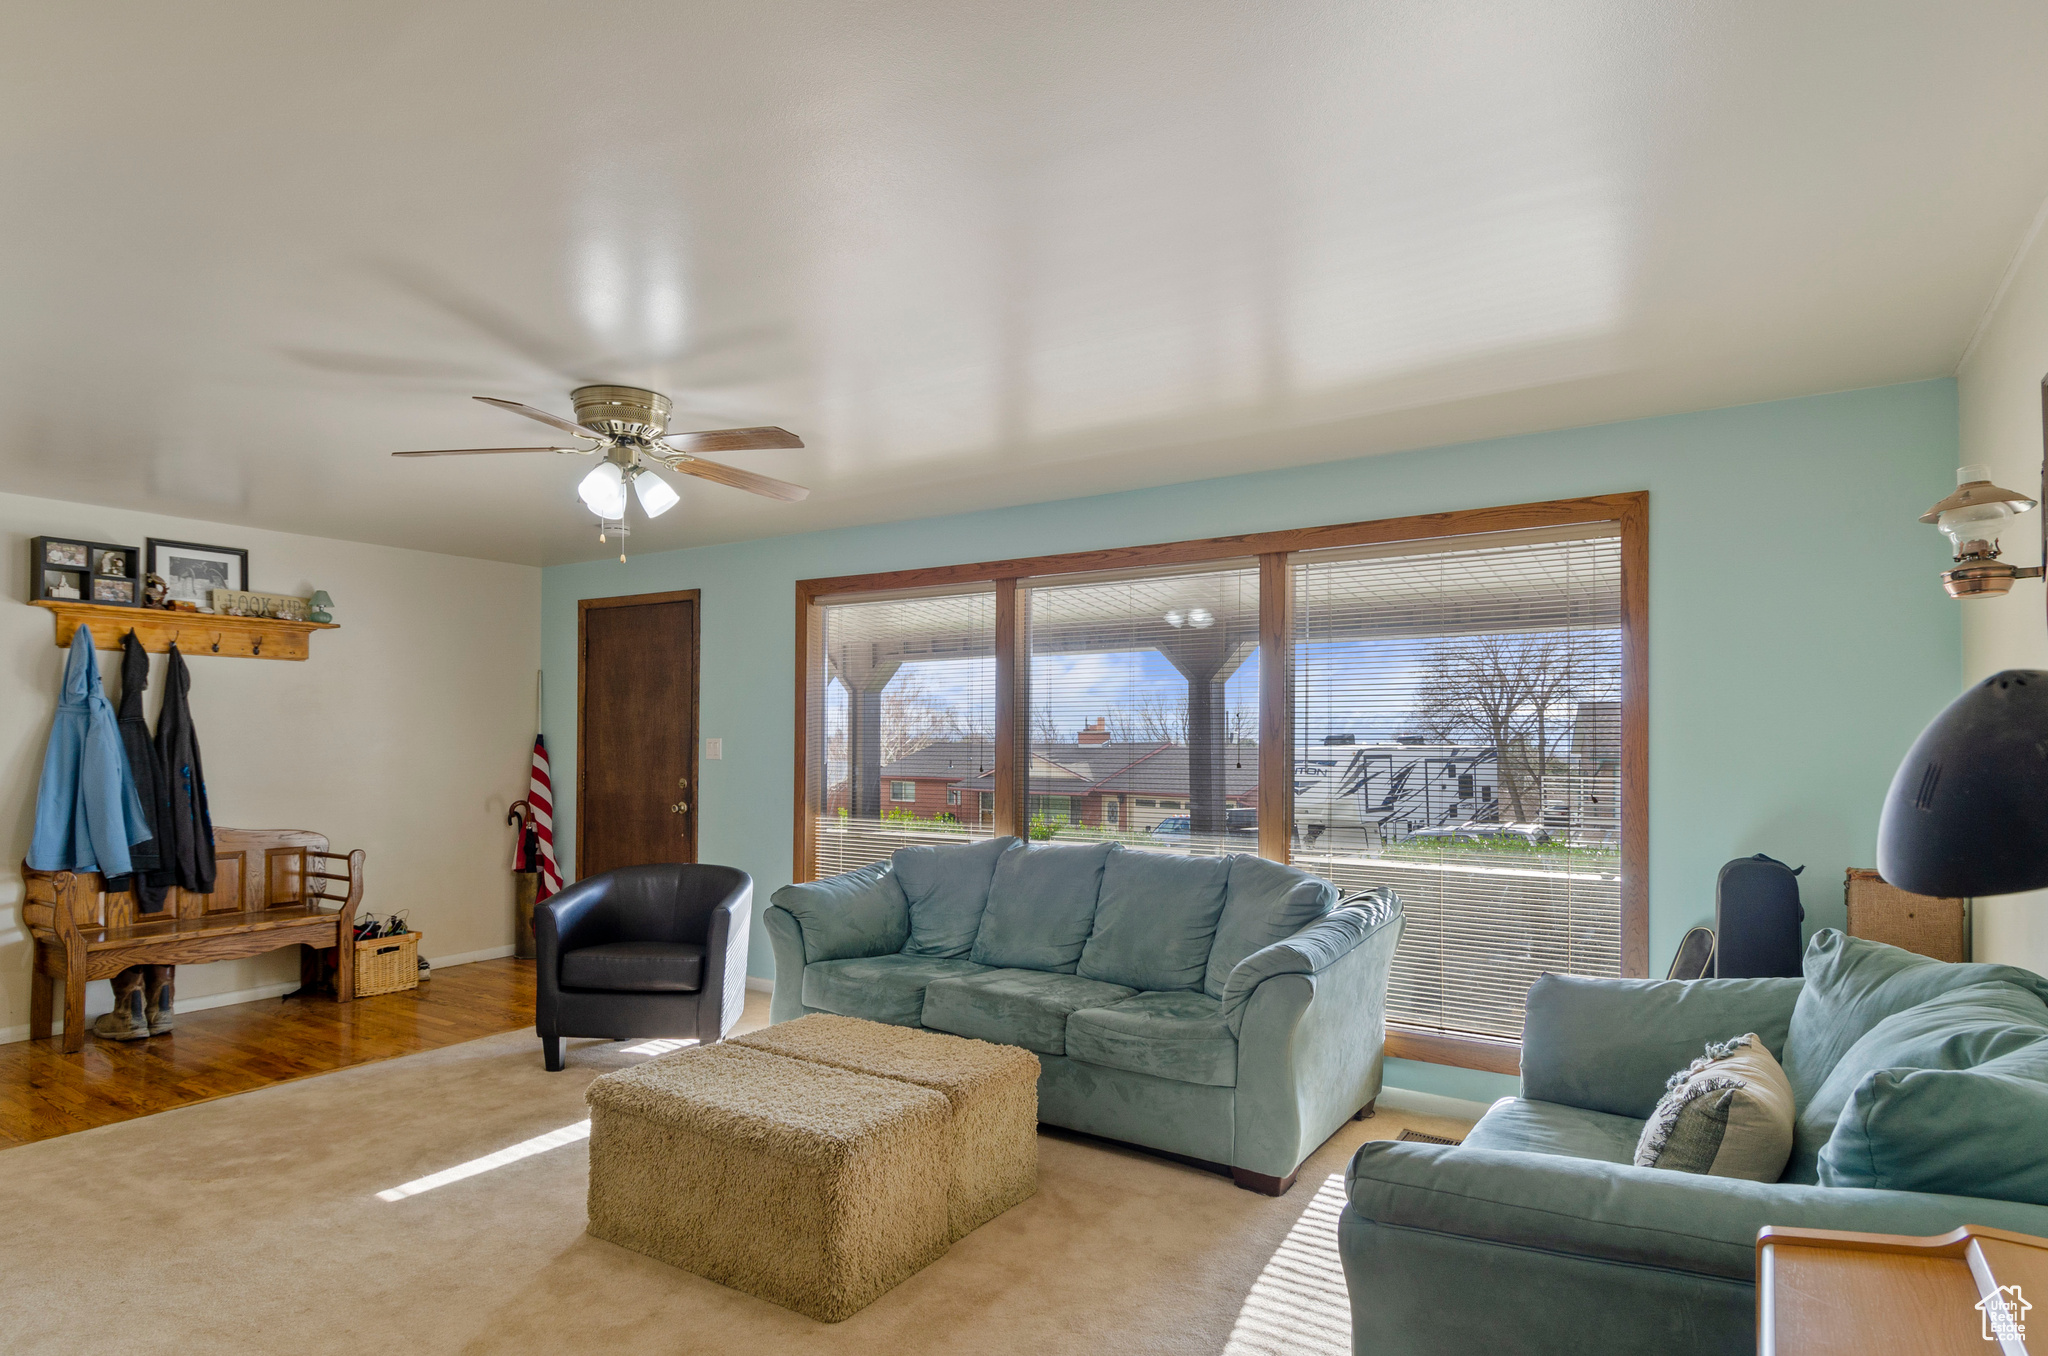 Living room featuring light hardwood and ceiling fan